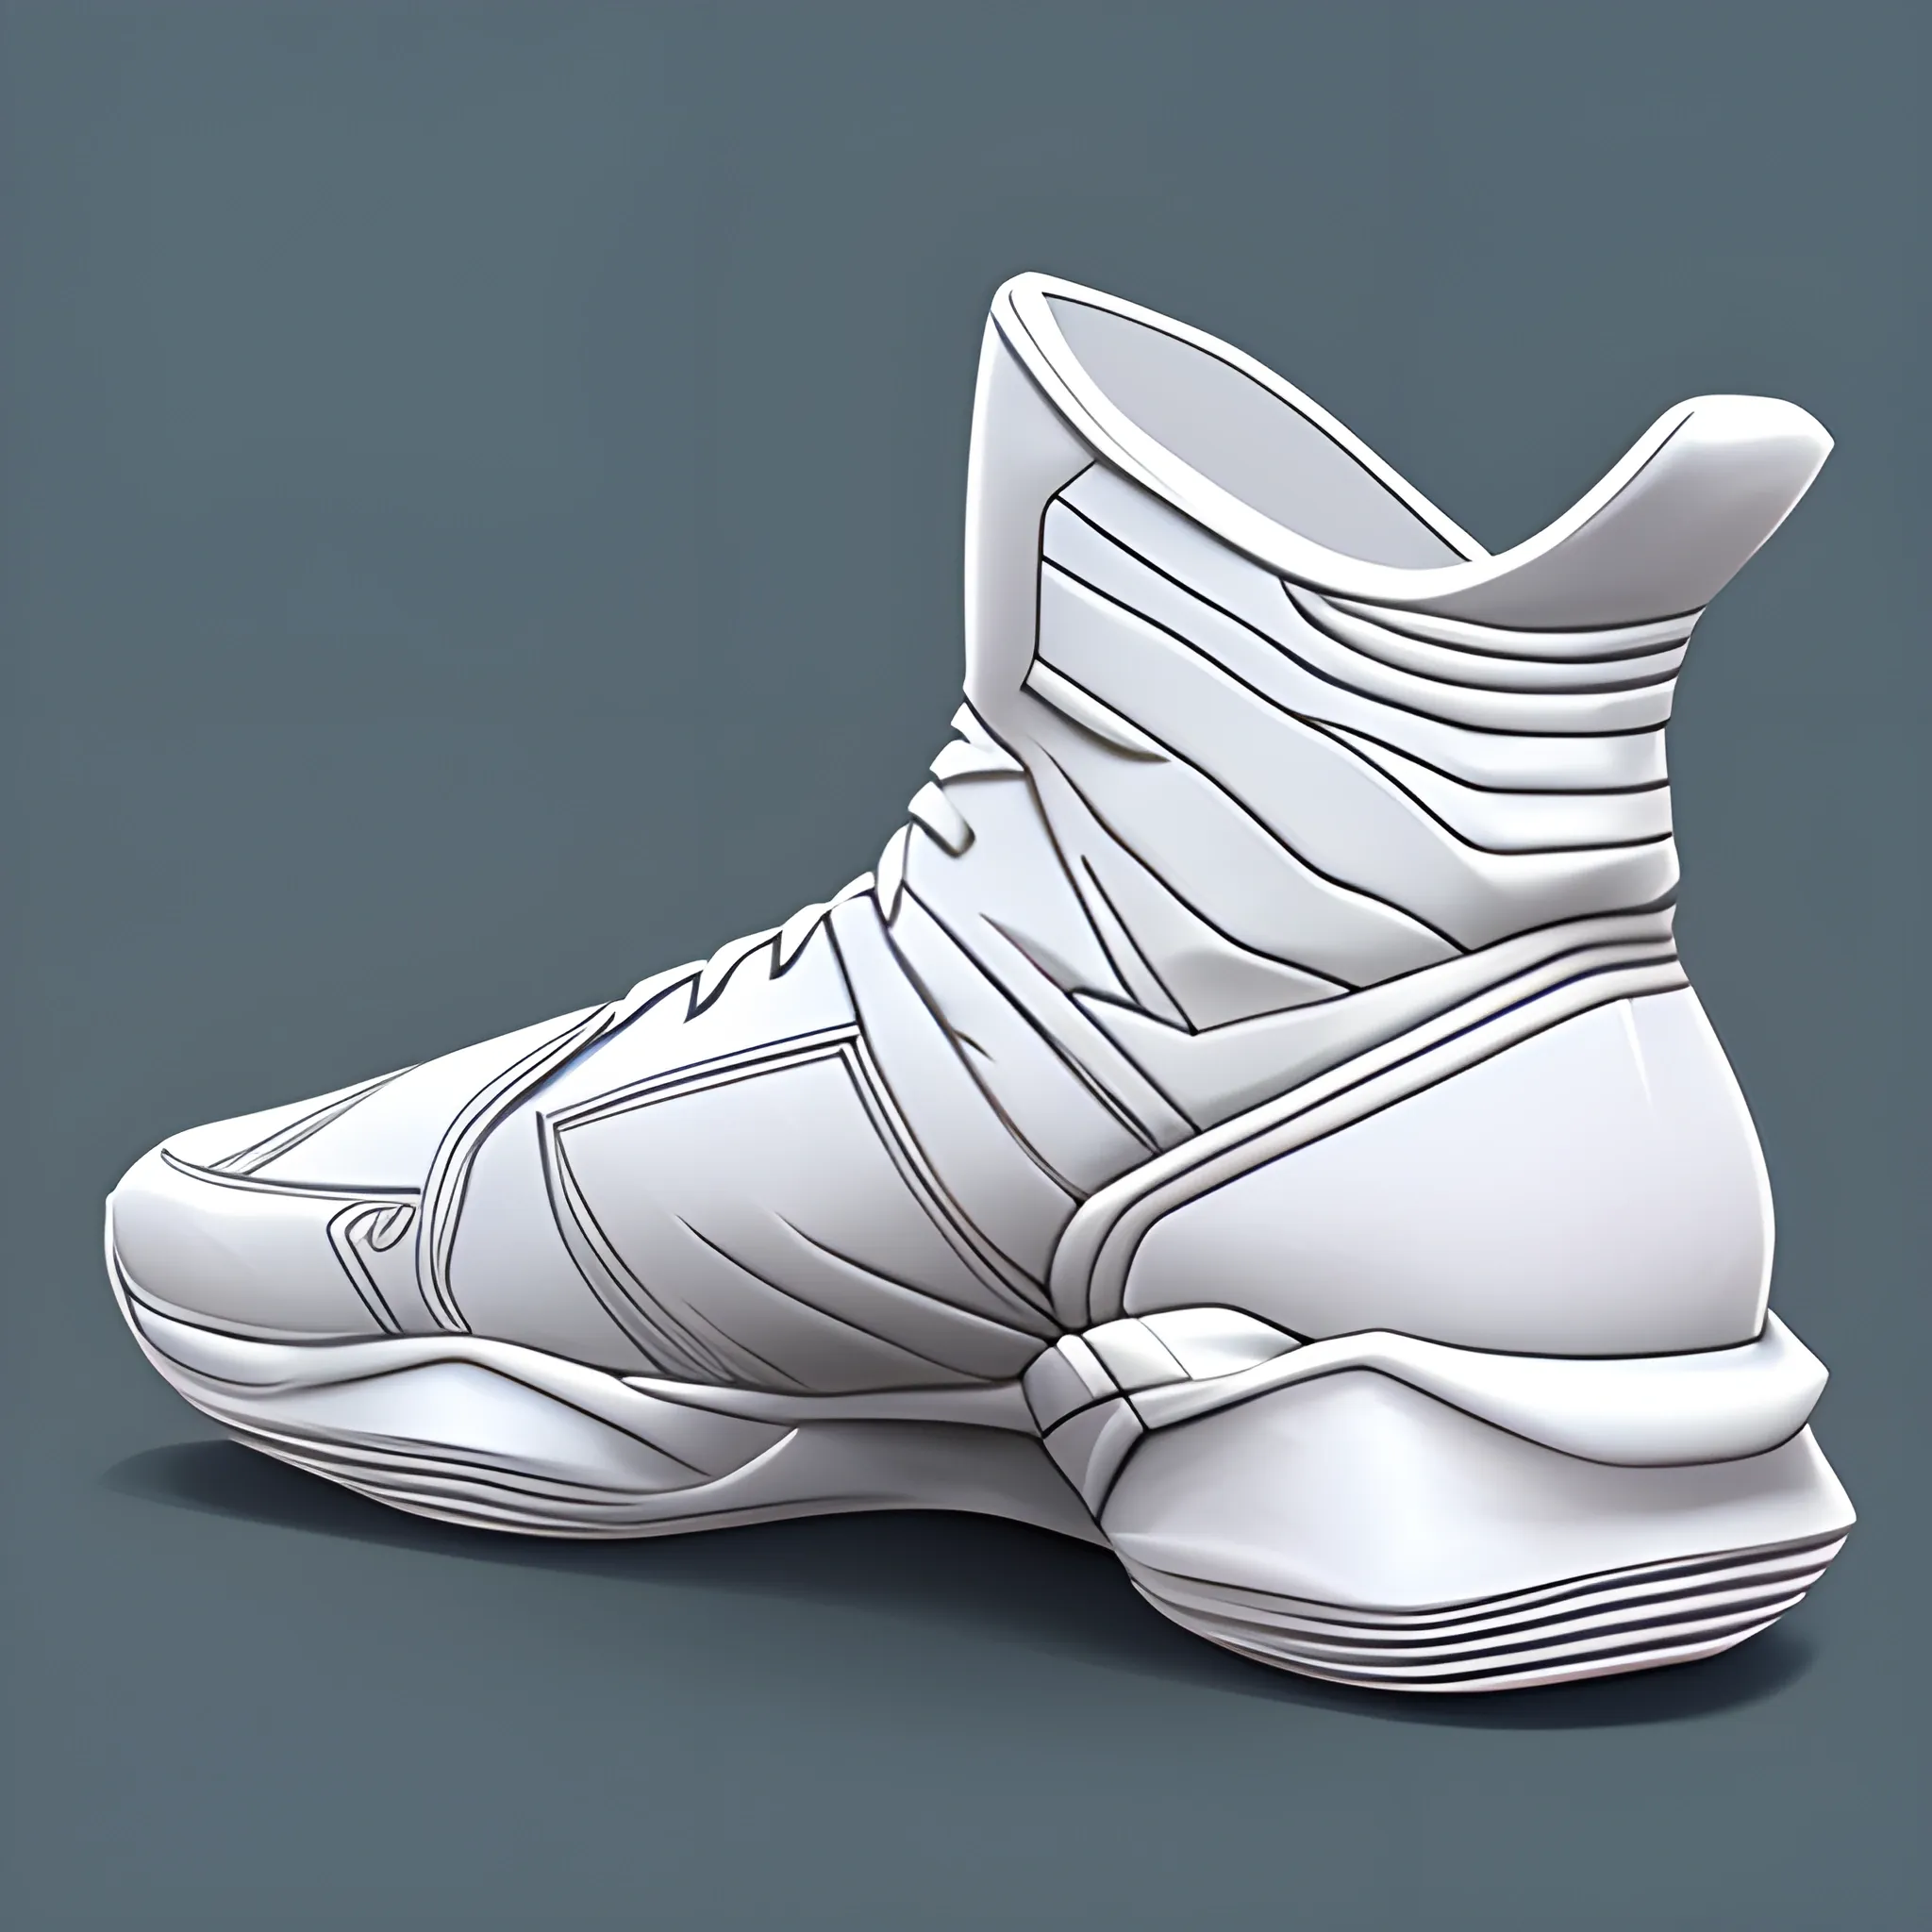 Concept Moon Knight sneakers, popular in art station, soft feeling, bloated, original, pure white, smooth, sharp focus